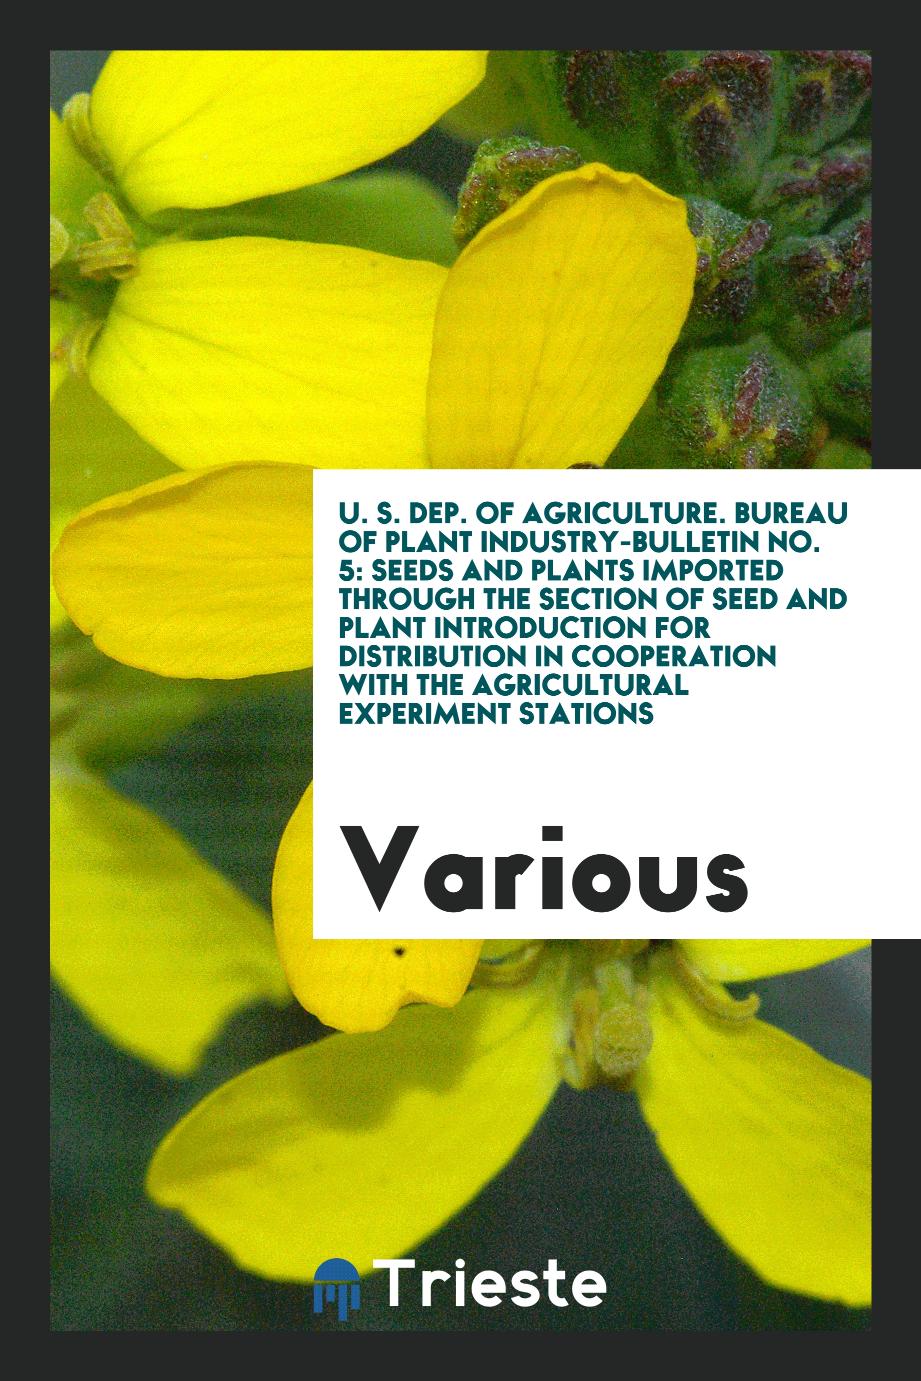 U. S. Dep. of Agriculture. Bureau of plant industry-bulletin No. 5: Seeds and Plants imported through the section of seed and plant introduction for distribution in cooperation with the agricultural experiment stations